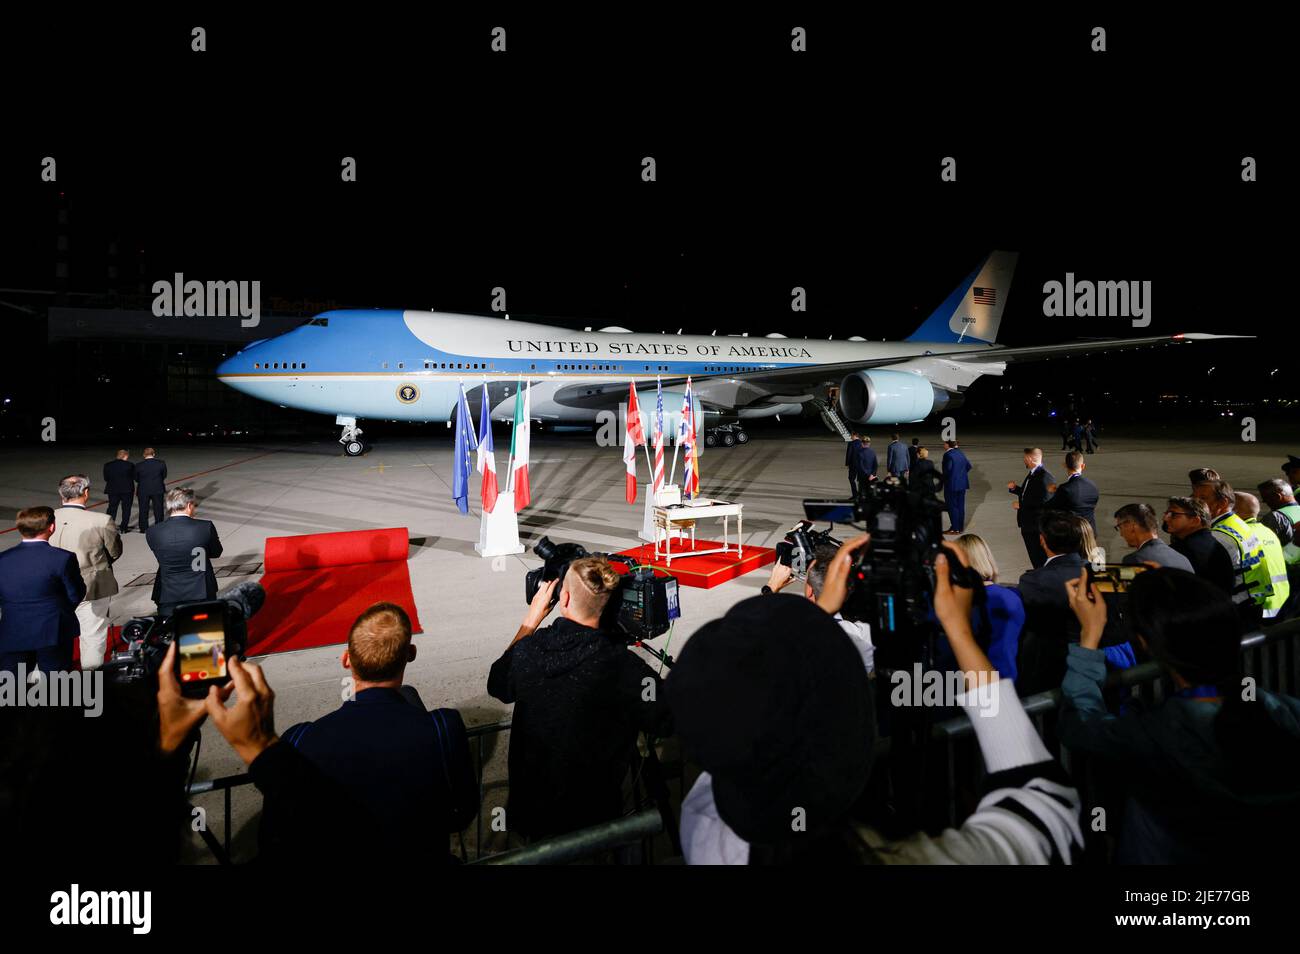 Air Force One, carrying U.S. President Joe Biden, arrives at Franz-Josef-Strauss airport in Munich ahead of the G7 summit, which will take place in the Bavarian alpine resort of Elmau Castle, Germany, June 25, 2022. REUTERS/Michaela Rehle Stock Photo